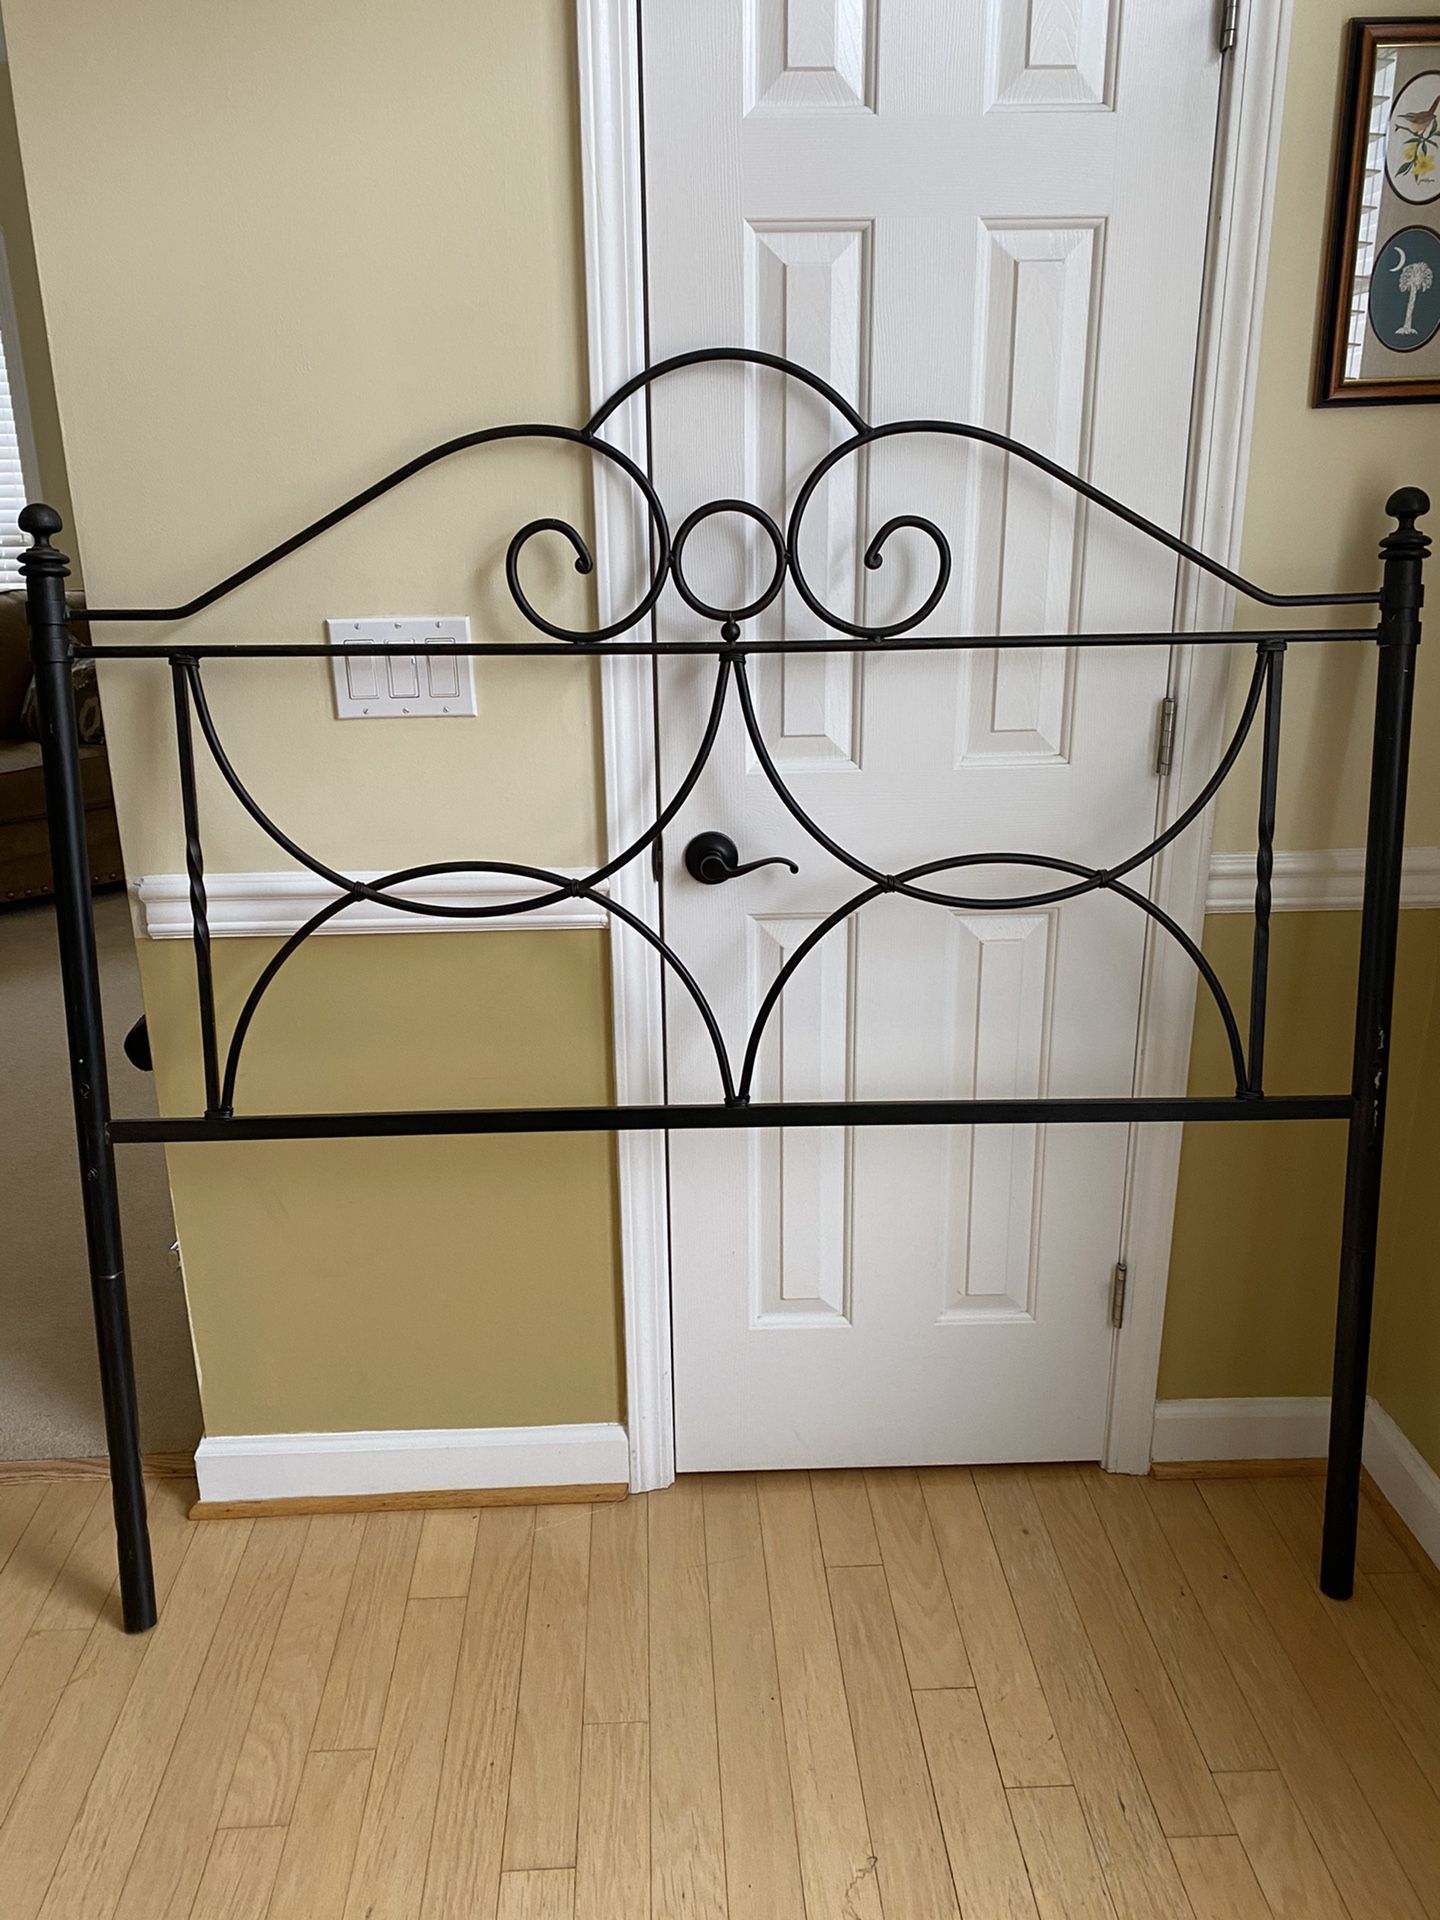 Full size bed frame with headboard